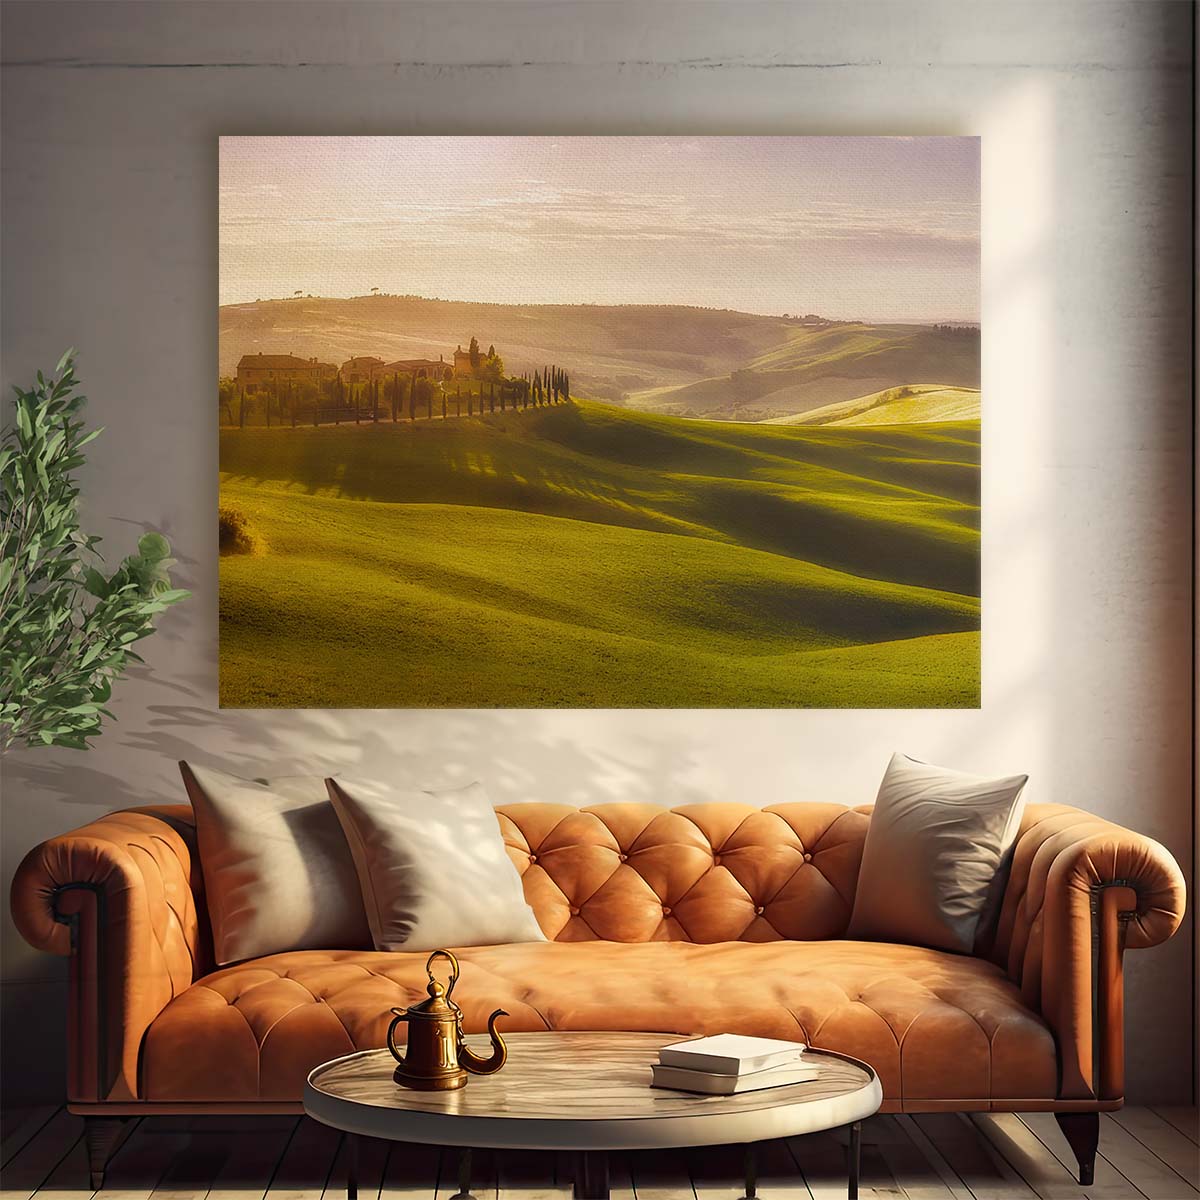 Iconic Tuscany Sunrise Landscape Panorama Wall Art by Luxuriance Designs. Made in USA.